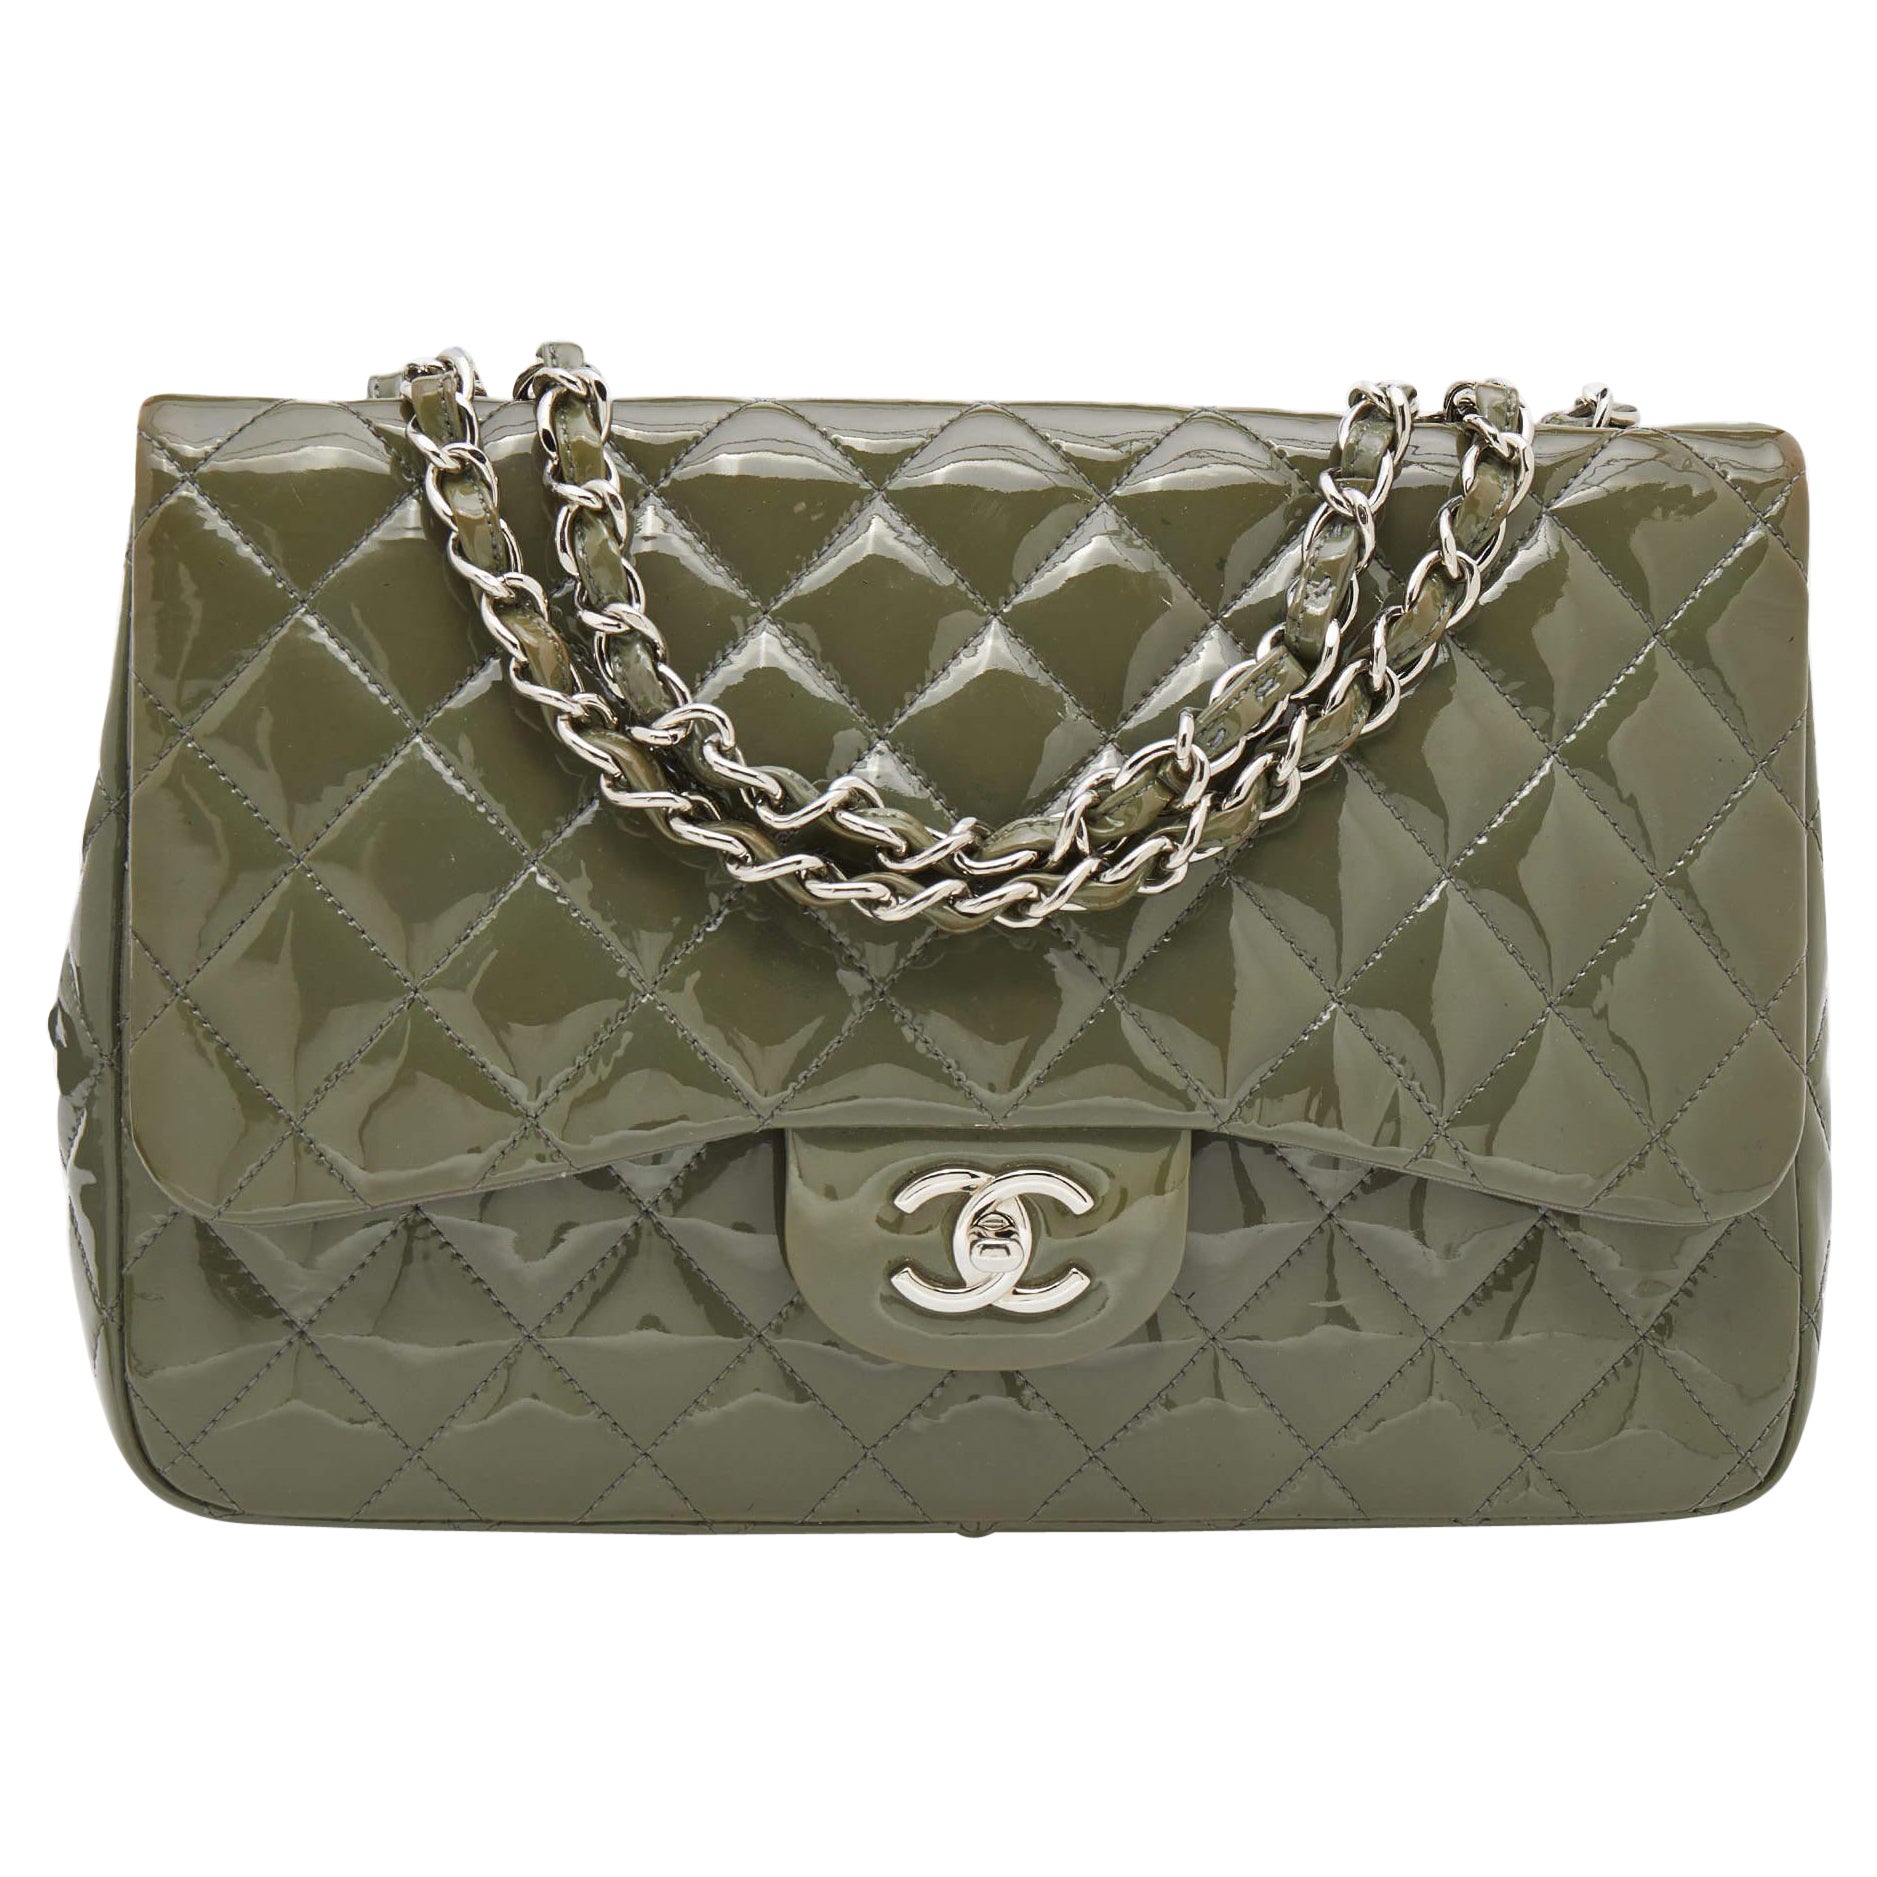 Chanel Olive Green Patent Leather Jumbo Classic Single Flap Bag